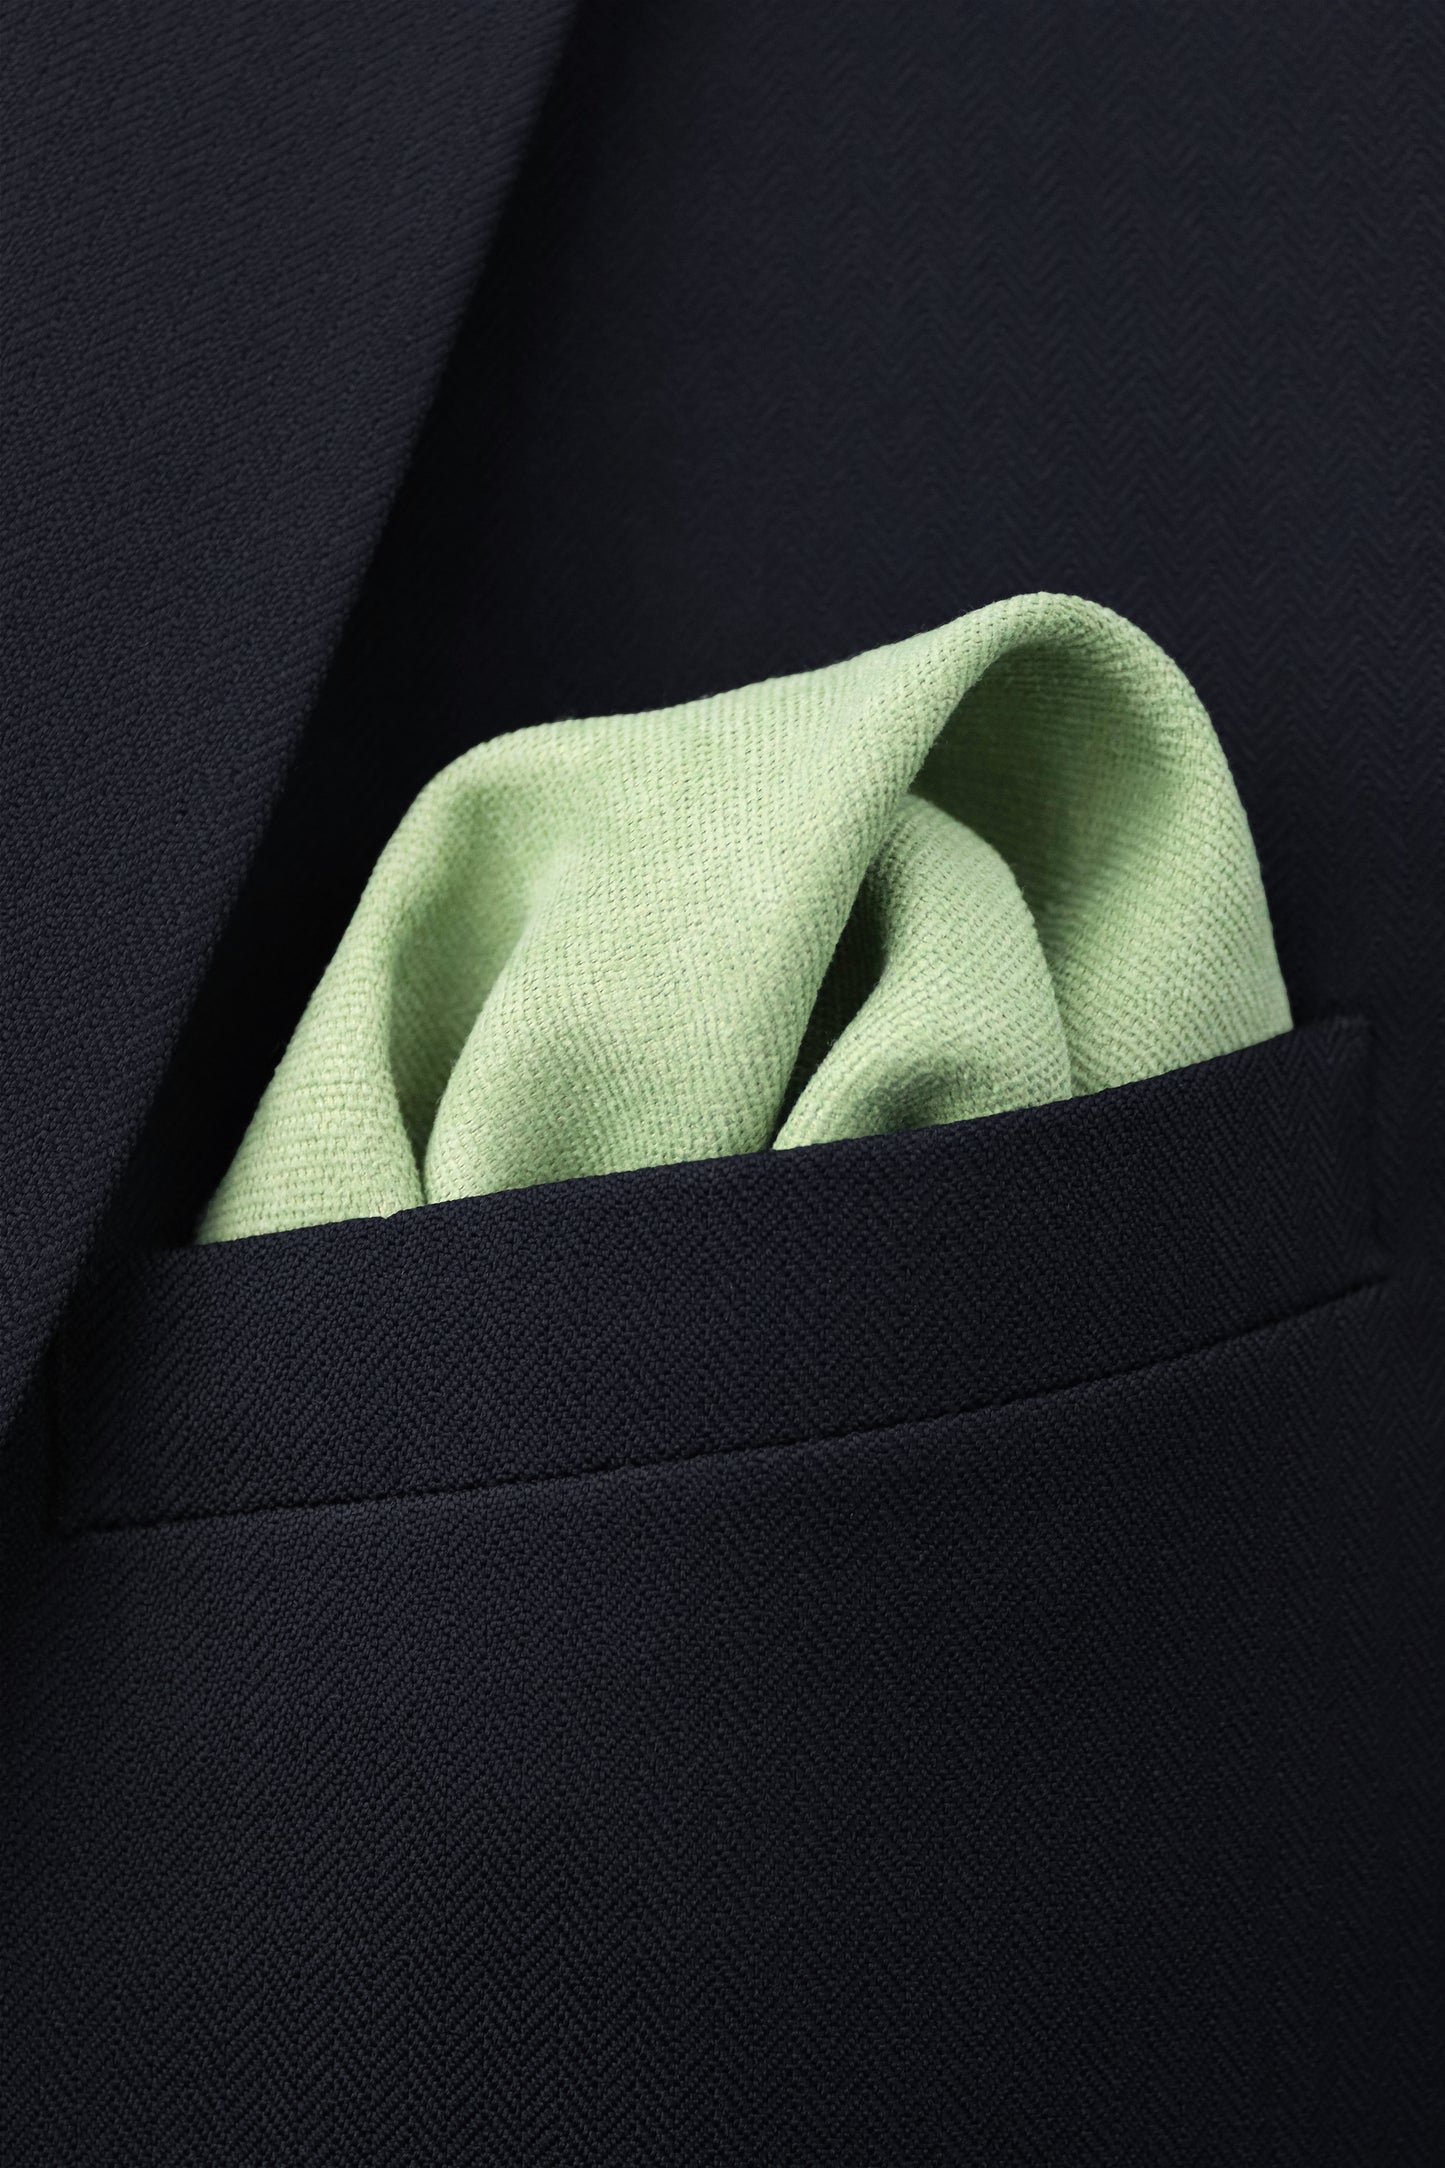 100% Brushed Cotton Suede Tie - Green